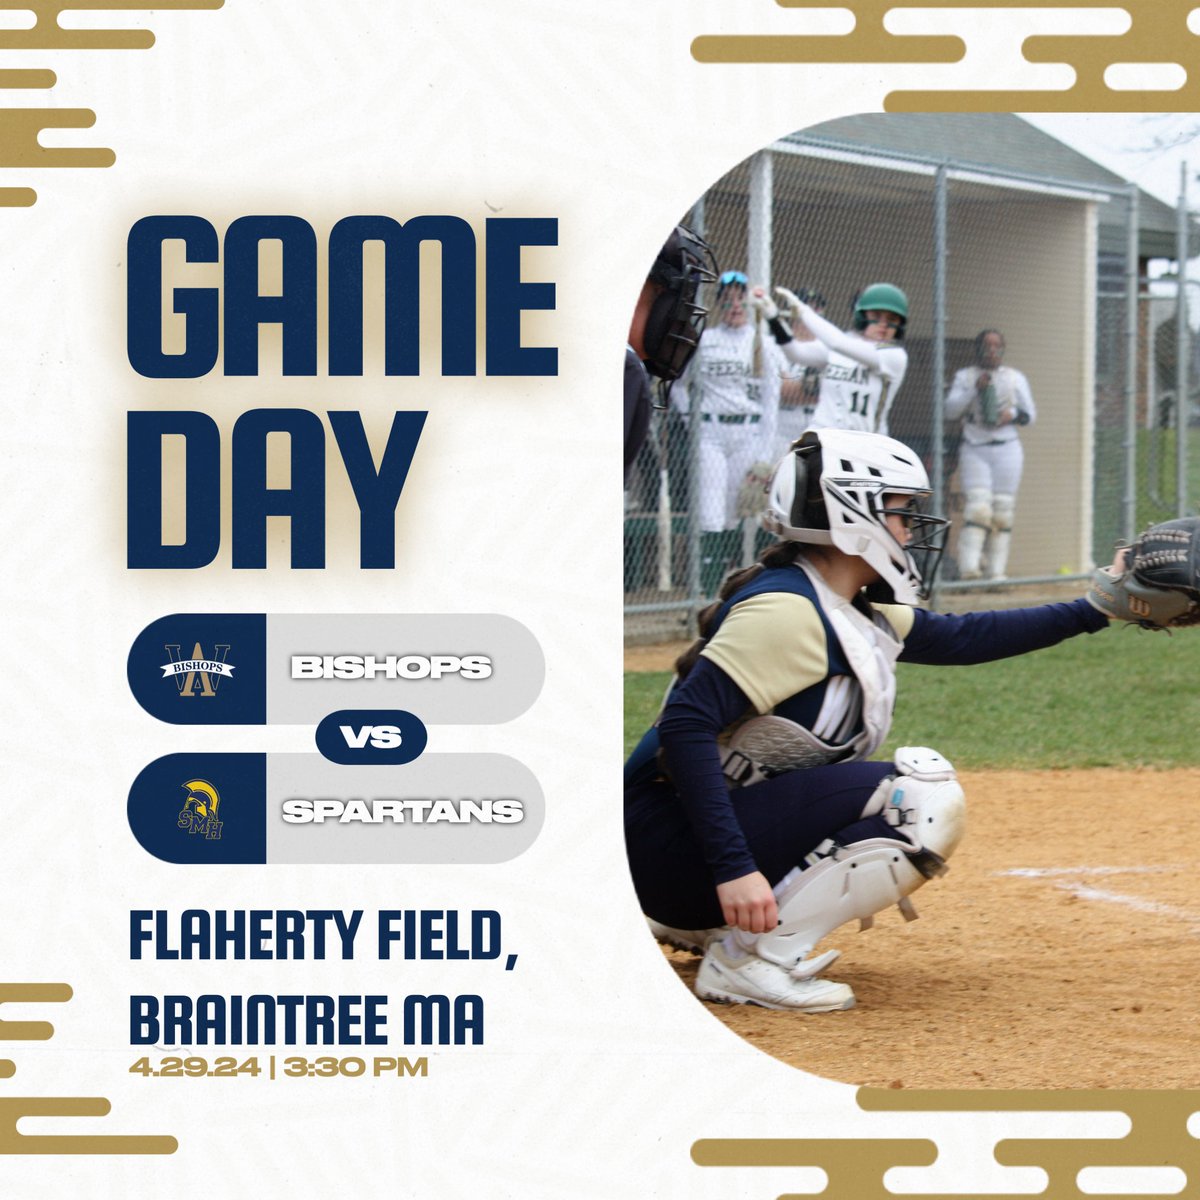 SOFTBALL: The Bishops take on the Spartans today at Flaherty Field! First pitch for Varsity and JV is at 3:30pm! Freshman head to Breed's Field in Lynn for a 3:30pm game as well! #rollbills @bishopssoftball